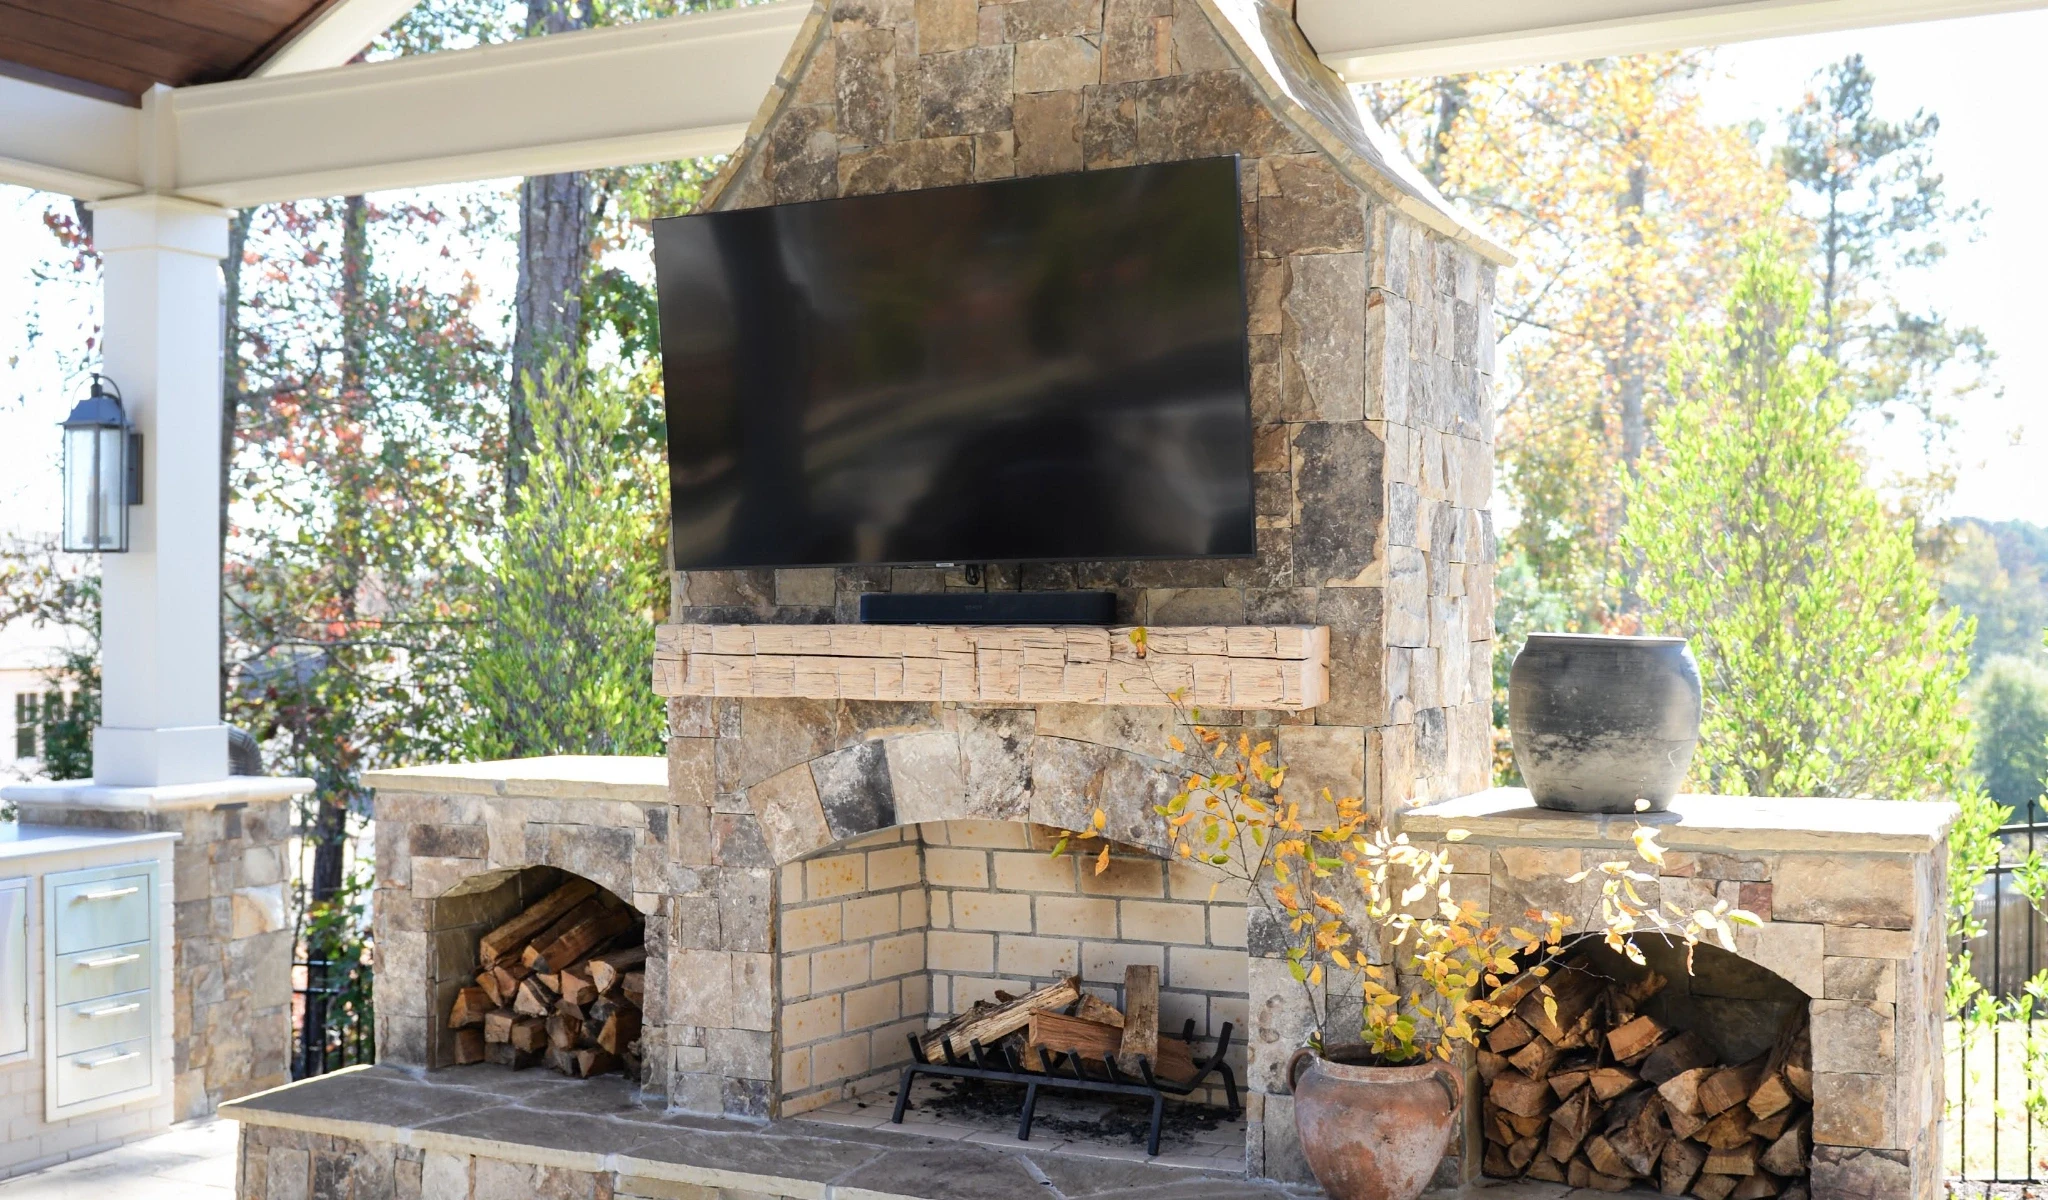 An outdoor stone fireplace with a TV above it.